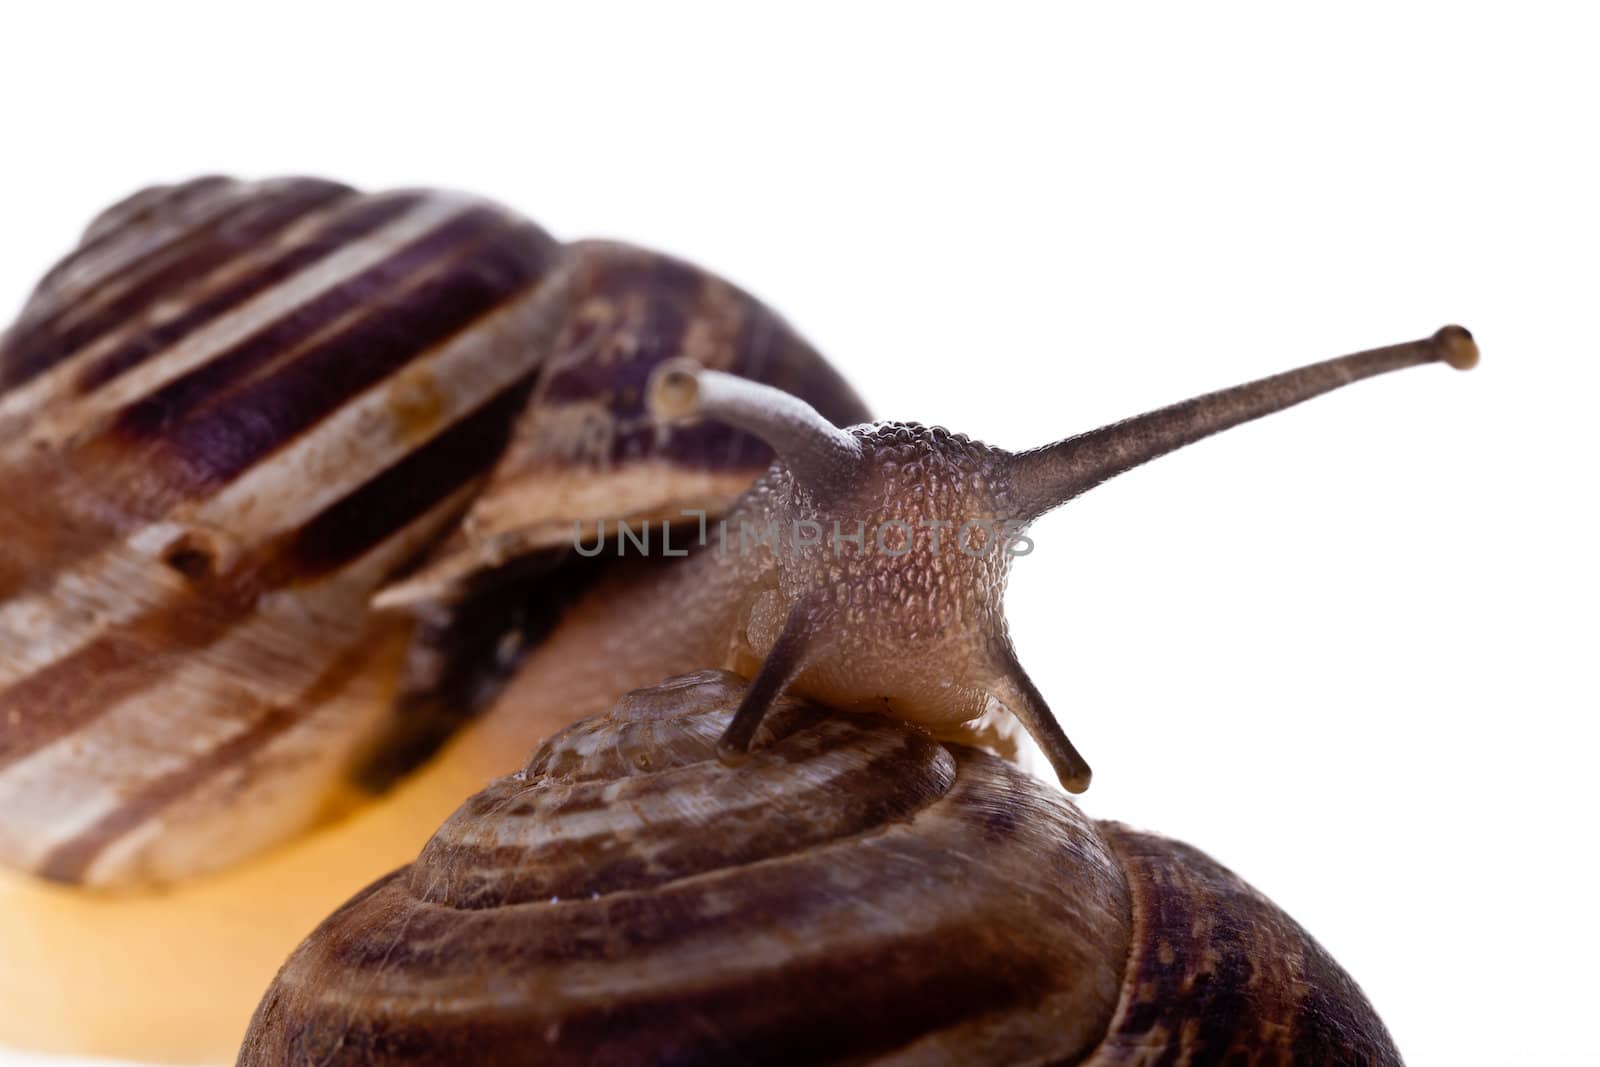 Extreme macro of a common land snail